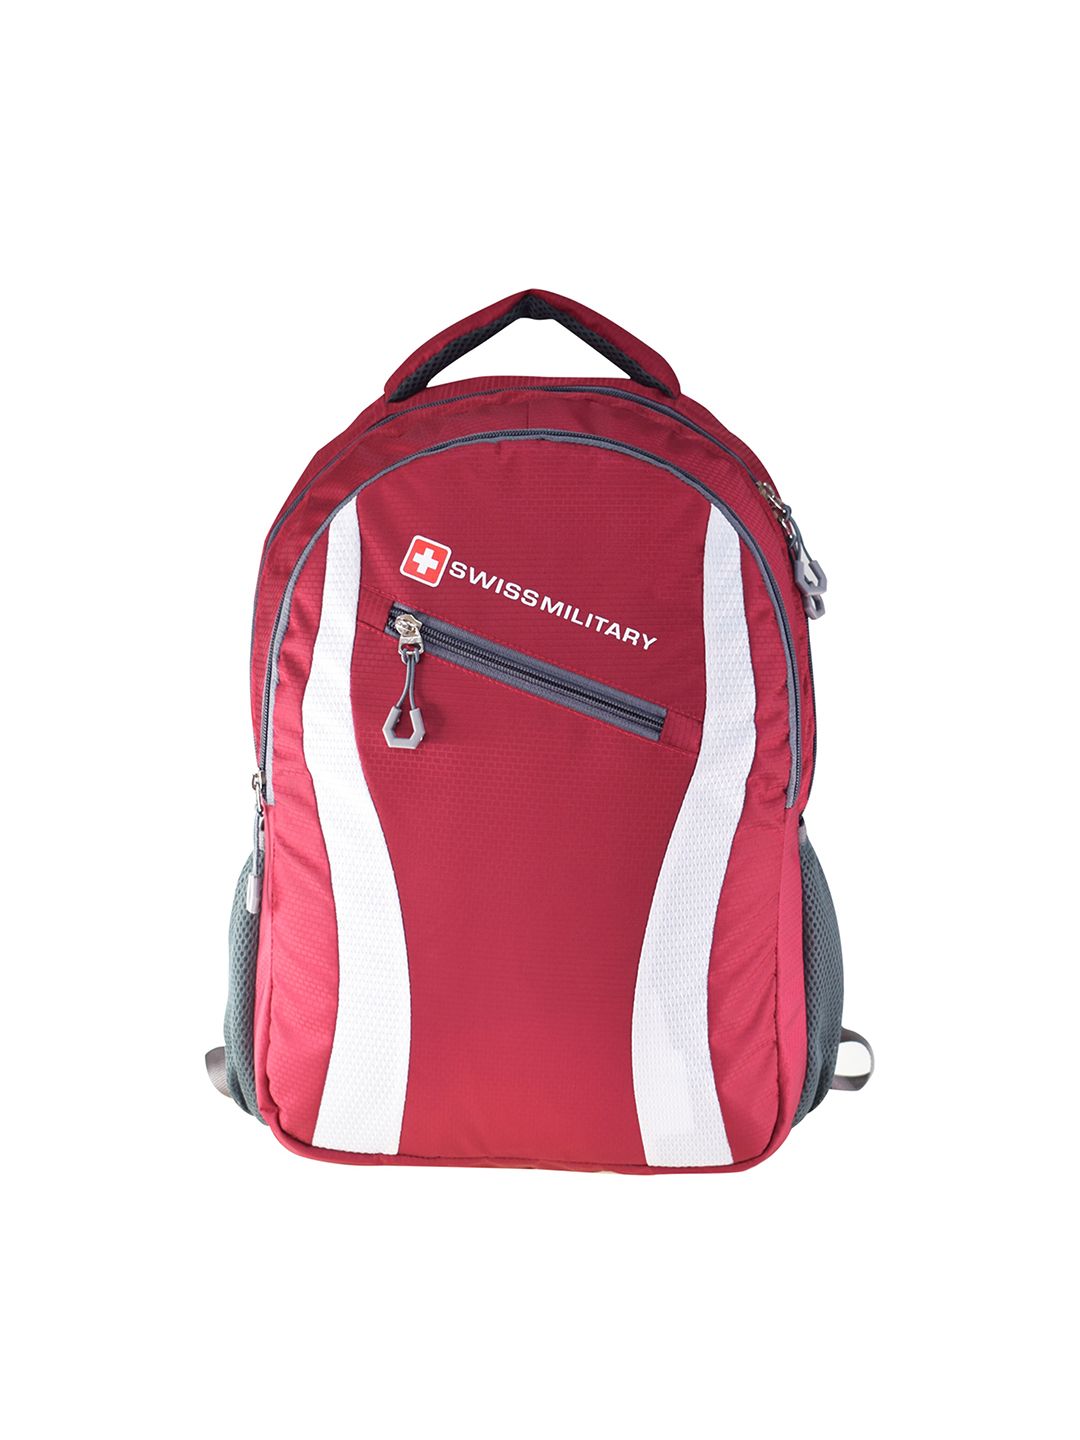 SWISS MILITARY Unisex Red & White Brand Logo Laptop Backpack Price in India